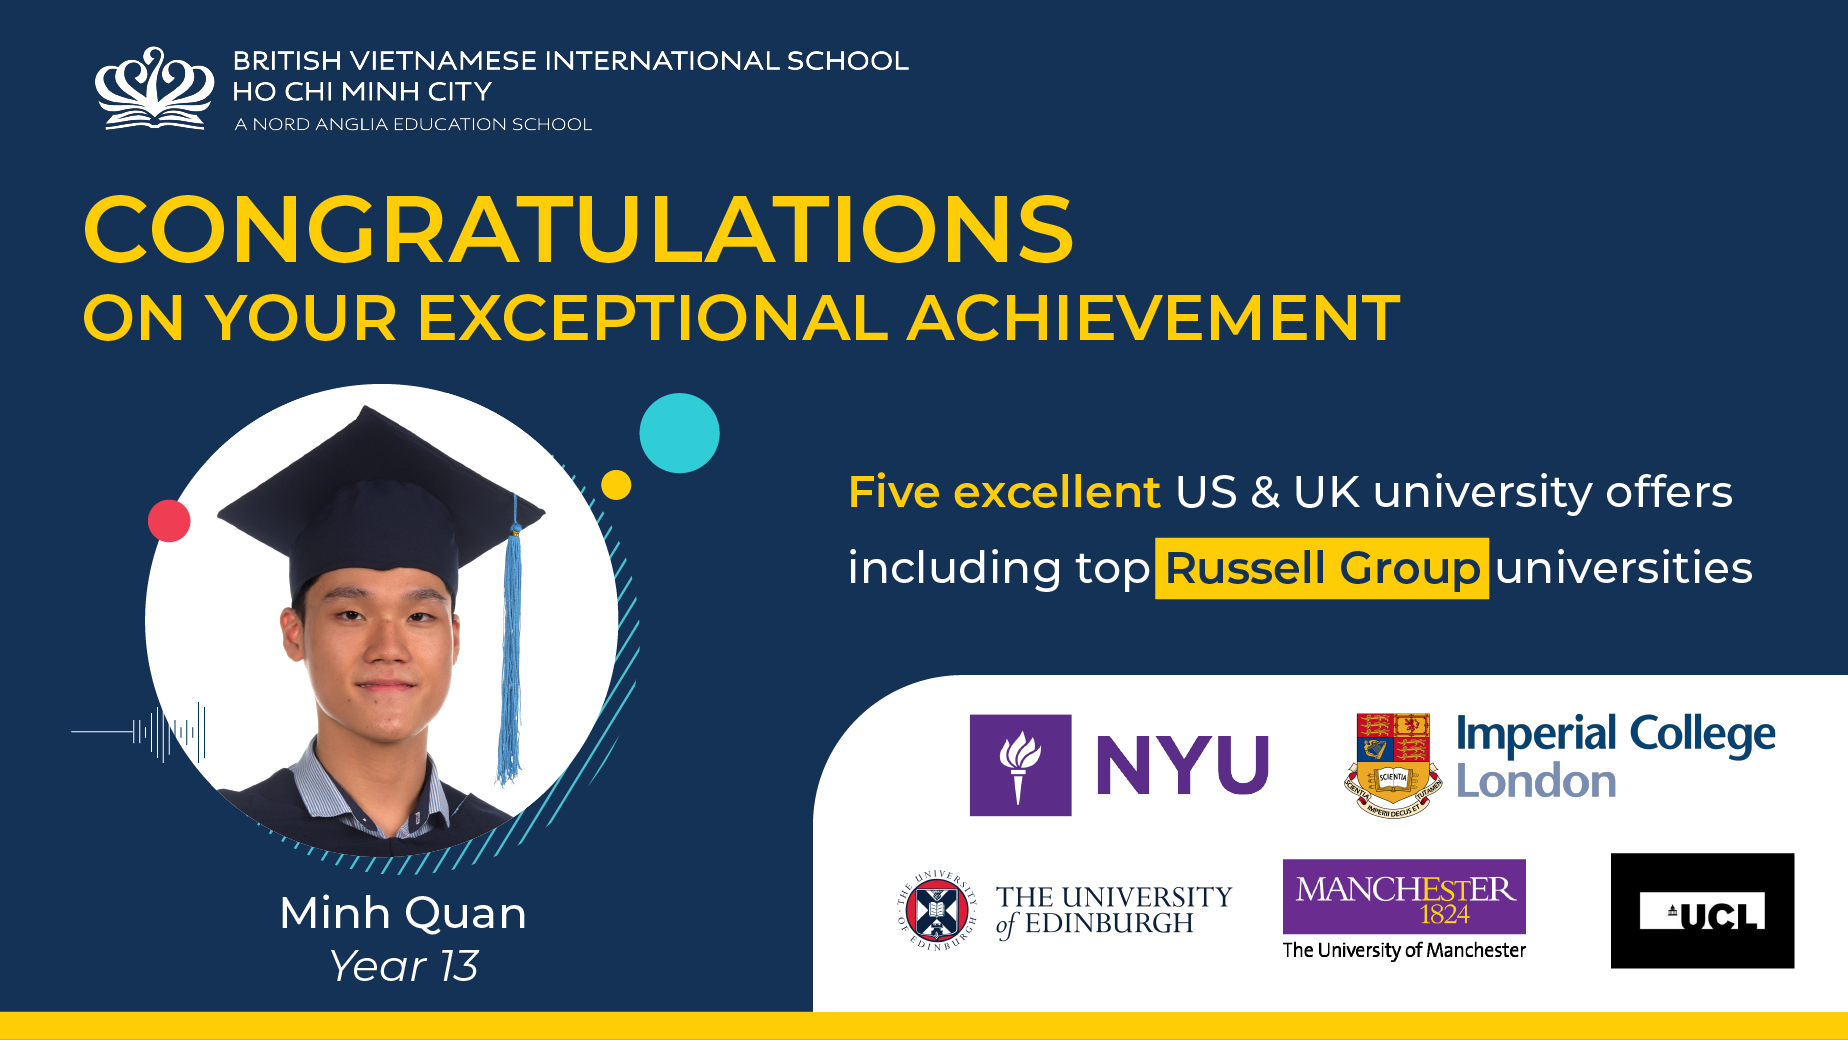 Minh Quan, a Year 13 student, receives 5 prestigious university offers from top universities in the UK and US - Minh Quan Year 13 student receives 5 prestigious university offers from top universities in UK US